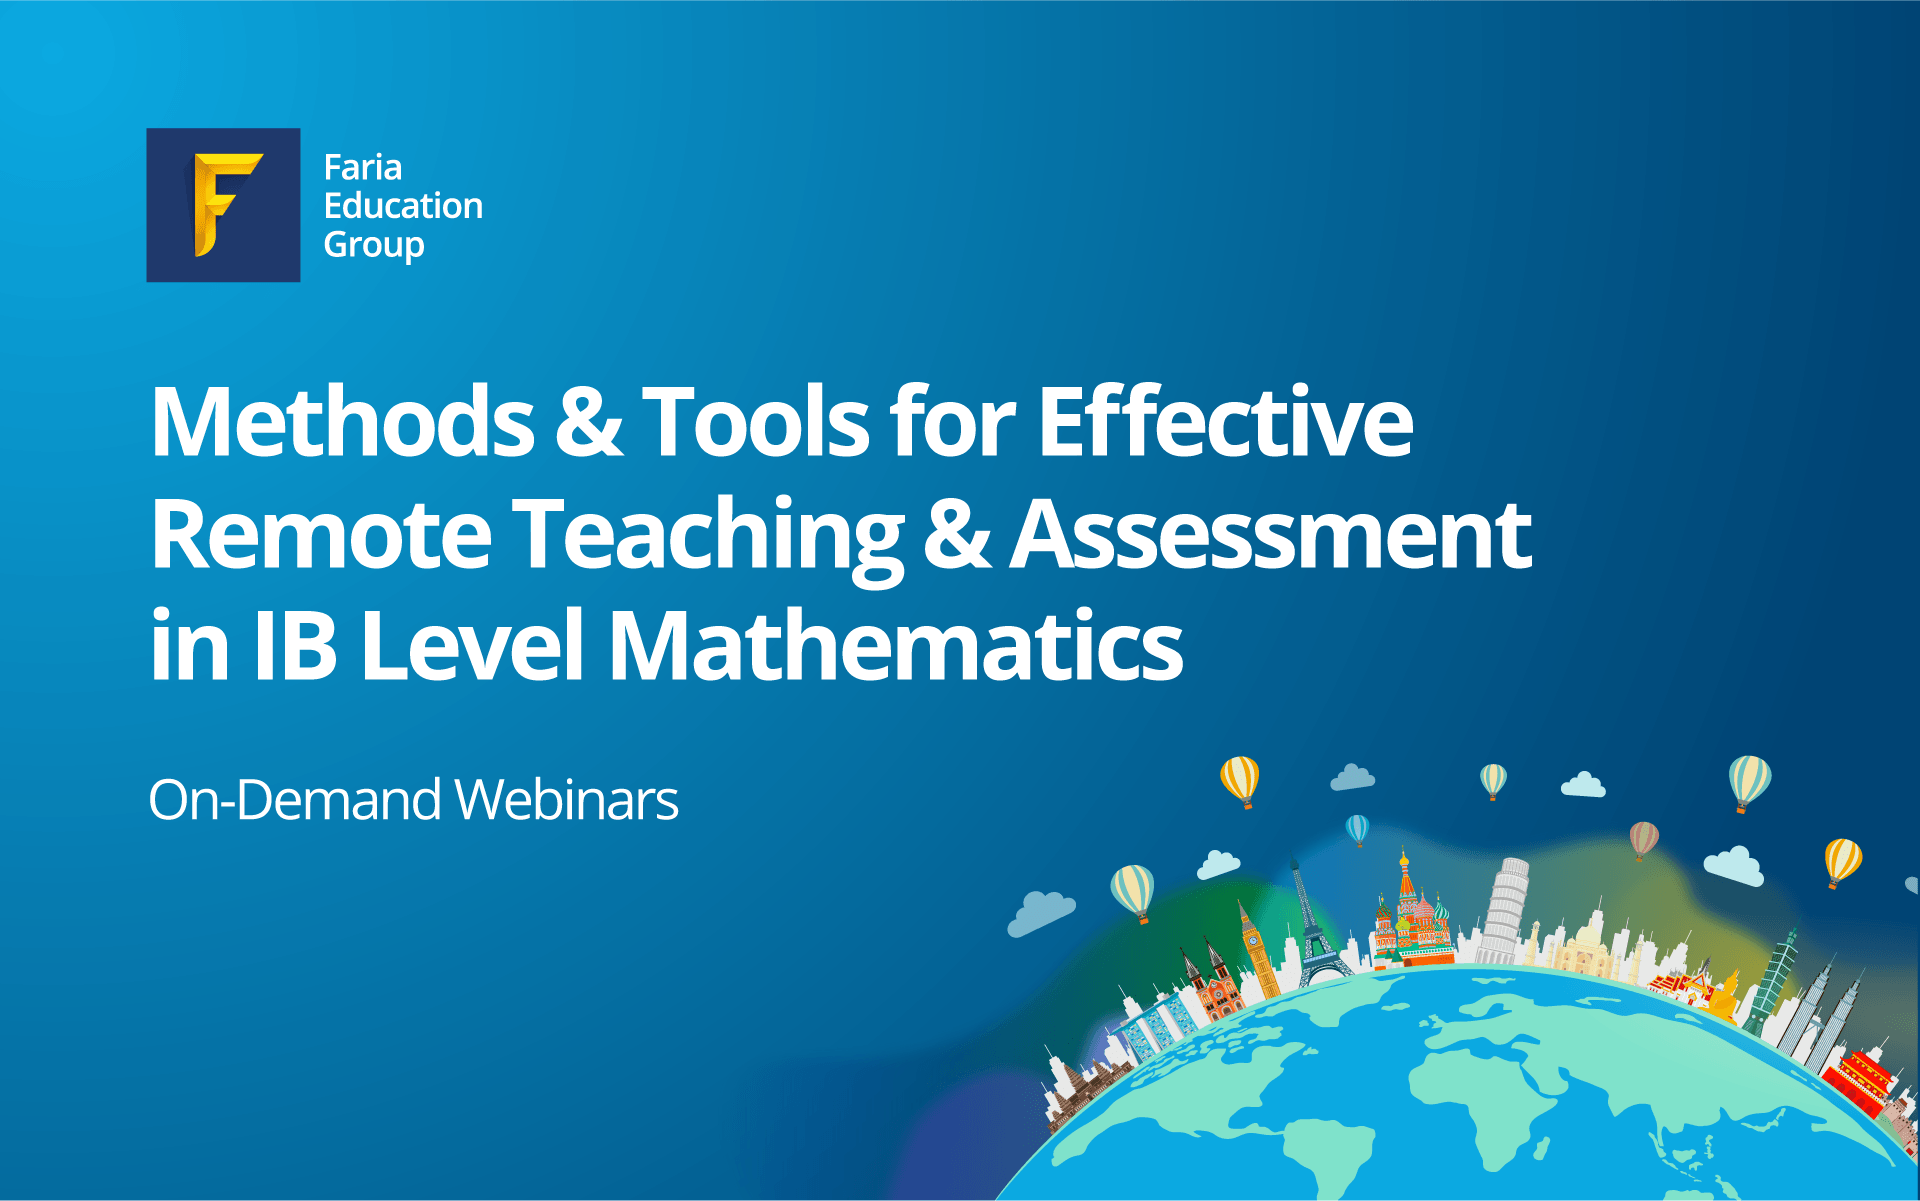 Methods and tools for effective remote teaching and assessment in IB level mathematics